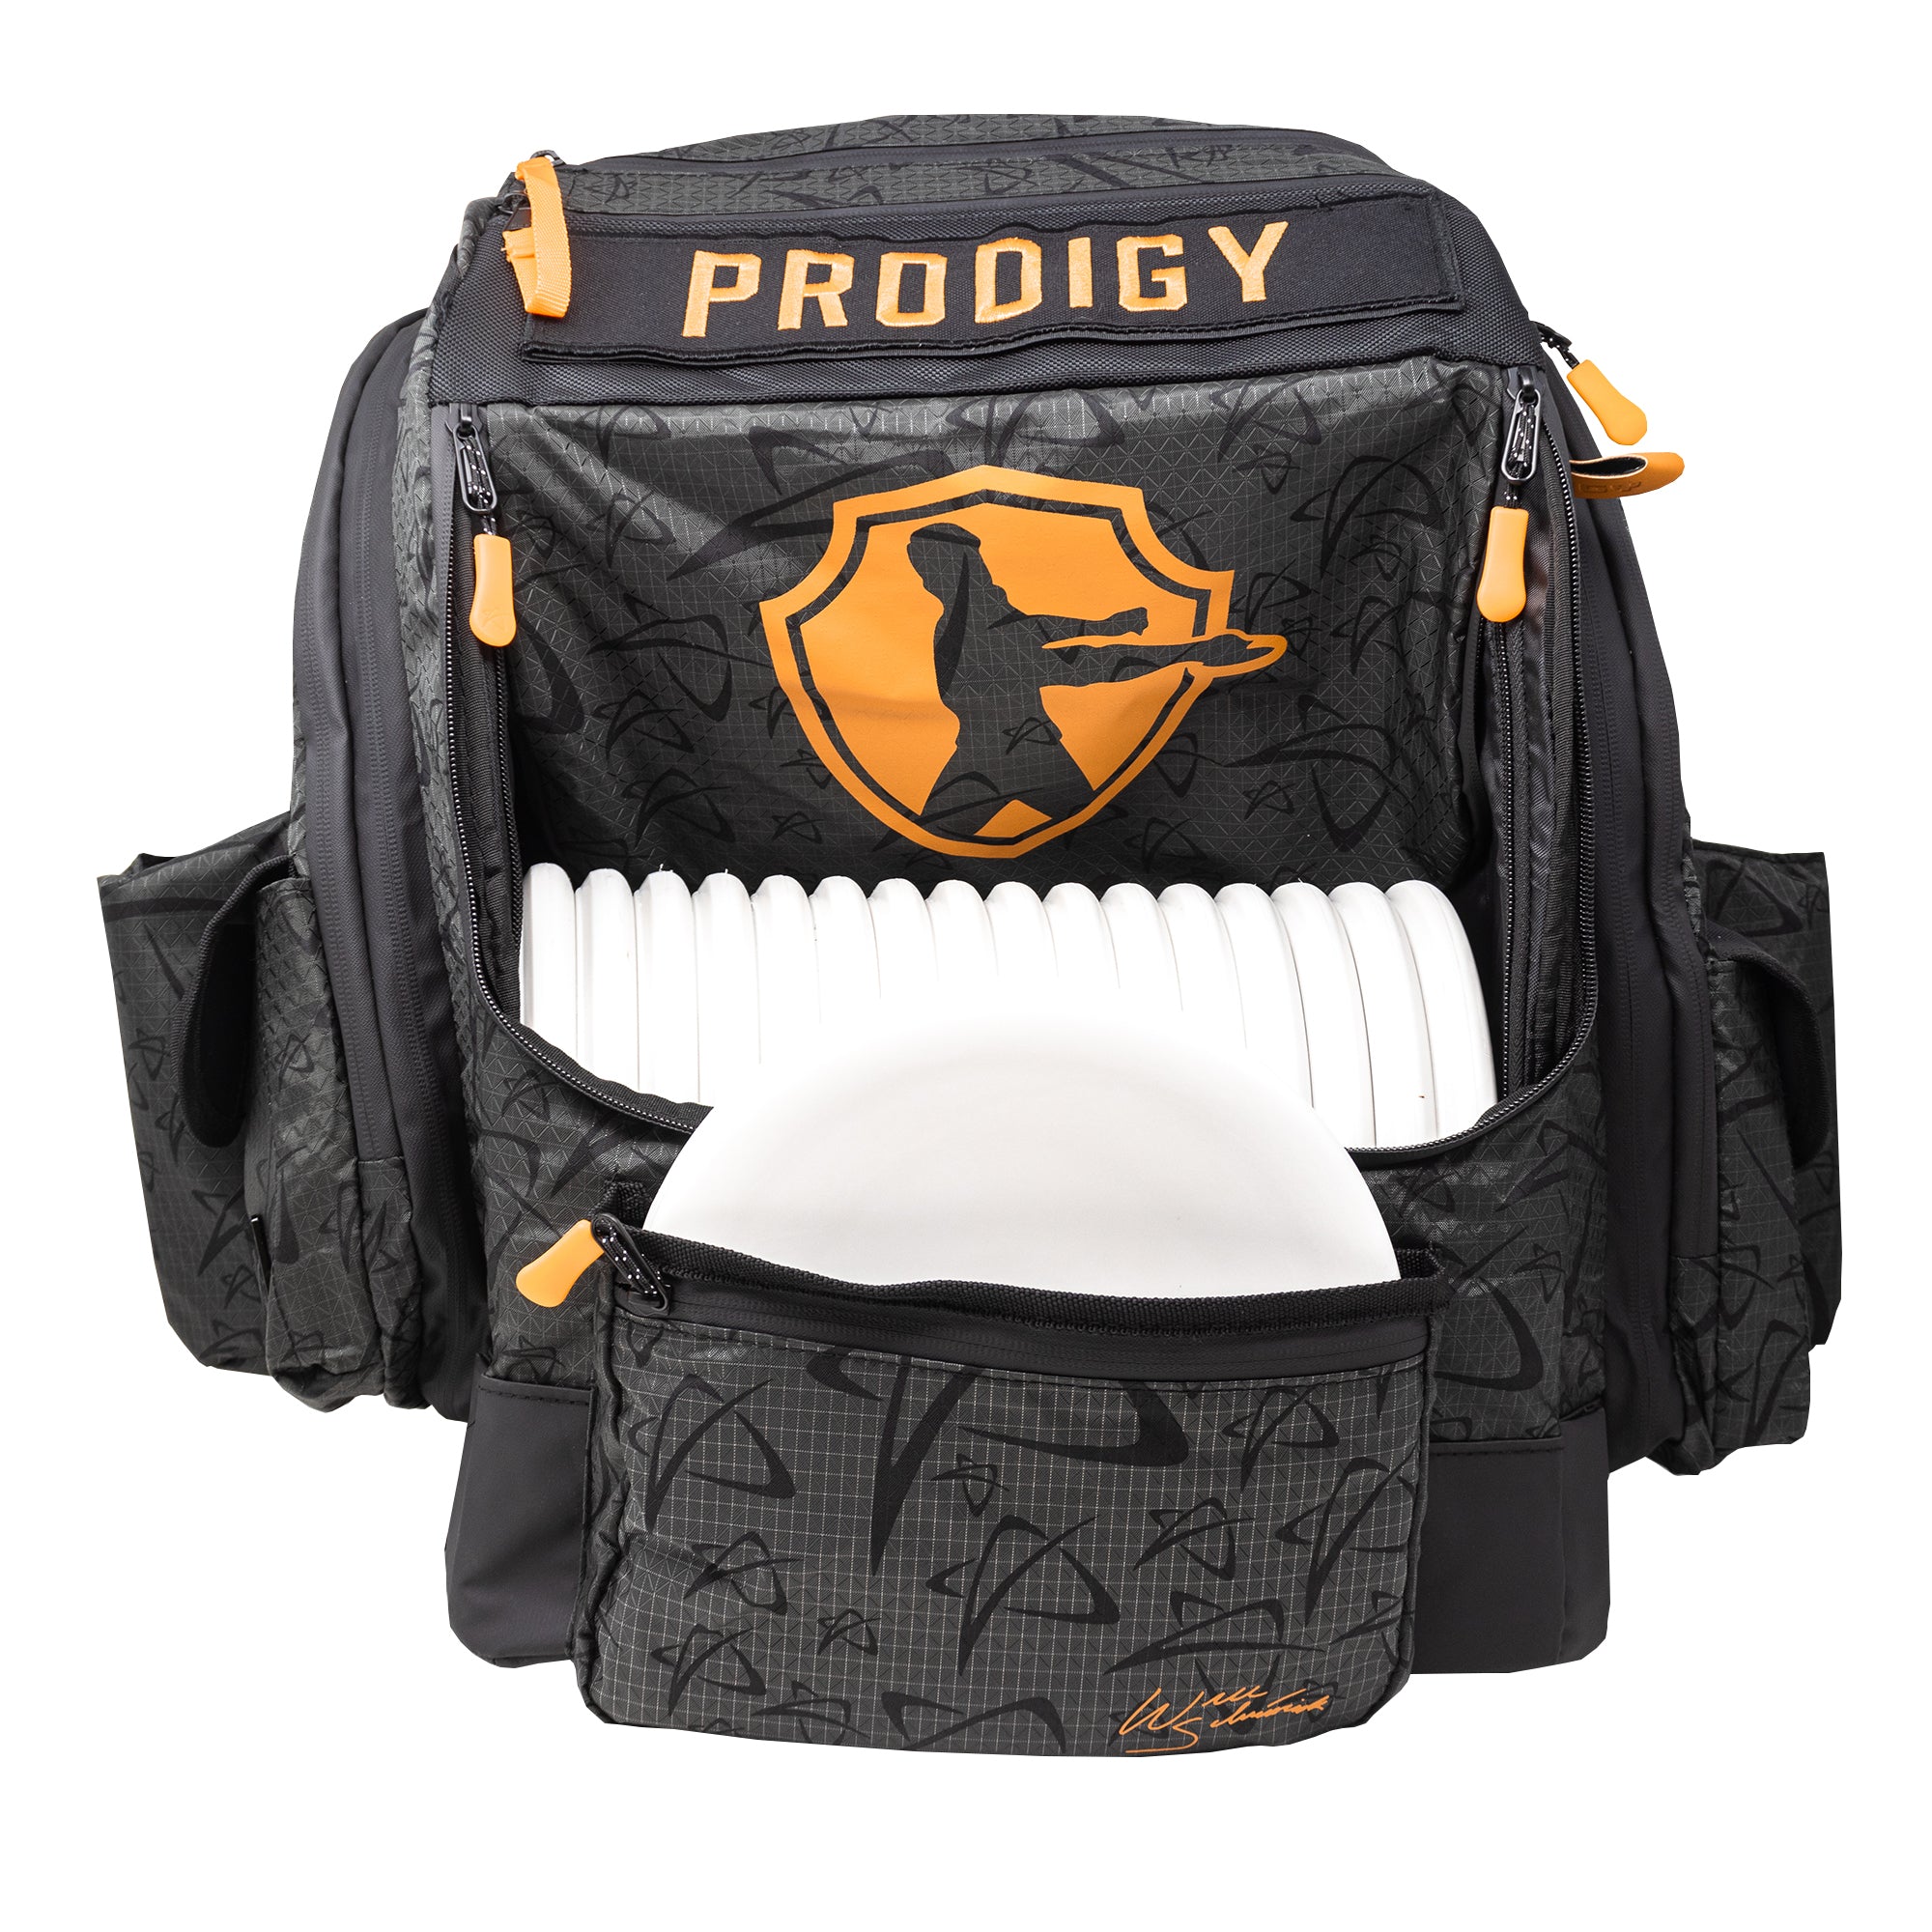 Prodigy Signature Series Will Schusterick BP-1 V3 Backpack Disc Golf Bag